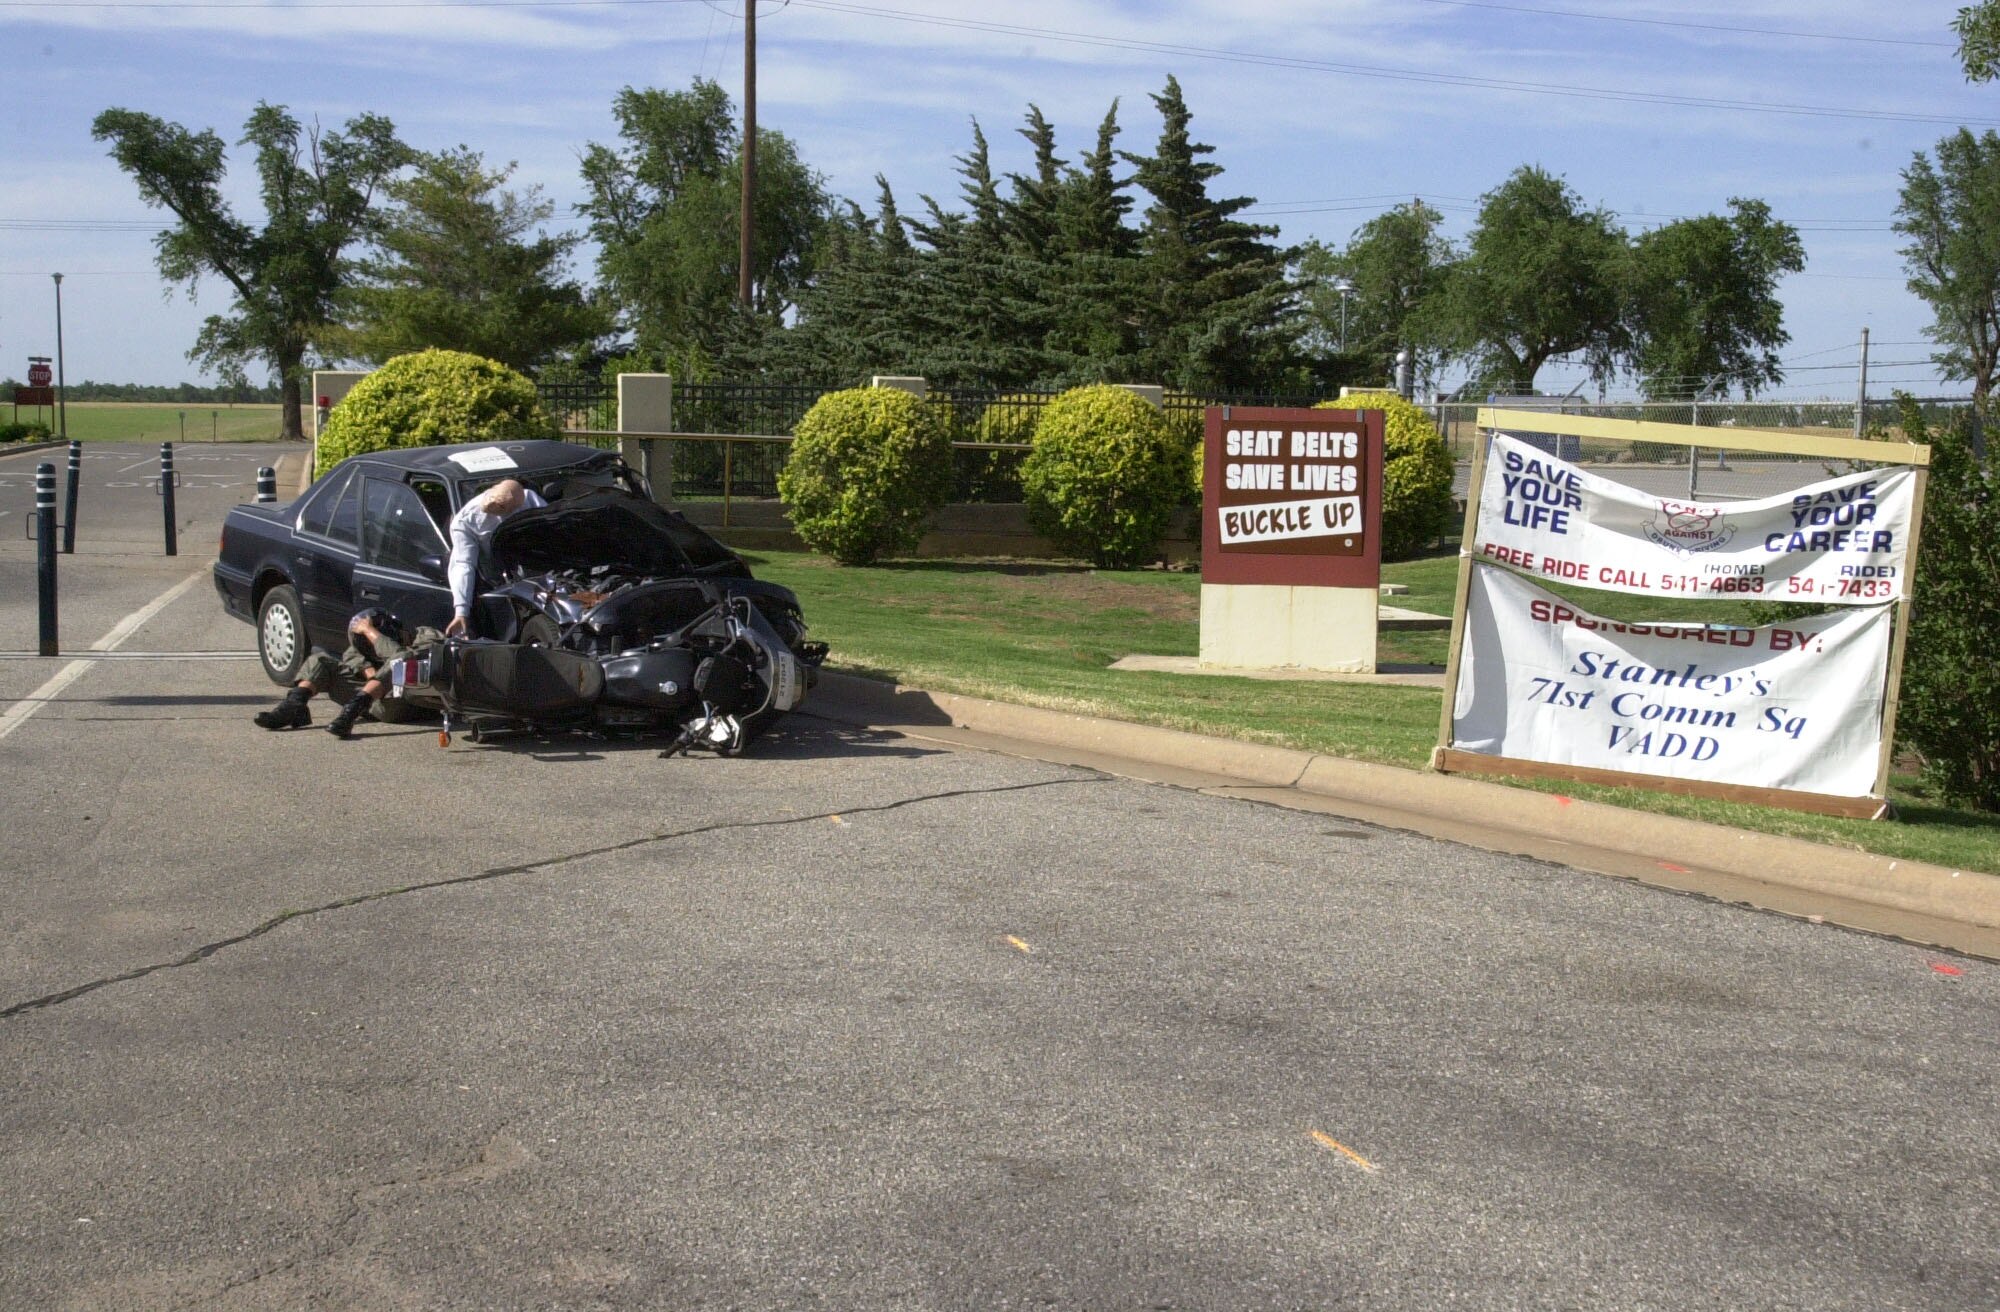 (Photo by SrA Amanda Mills) A wrecked car and motorcycle remind people leaving Vance Air Force Base of the importance of seat belts and not drinking and driving. 
The display, sponsored by Stanley’s of Enid, the 71st Communications Squadron and Vance Against Drunk Driving, runs until after the holiday.